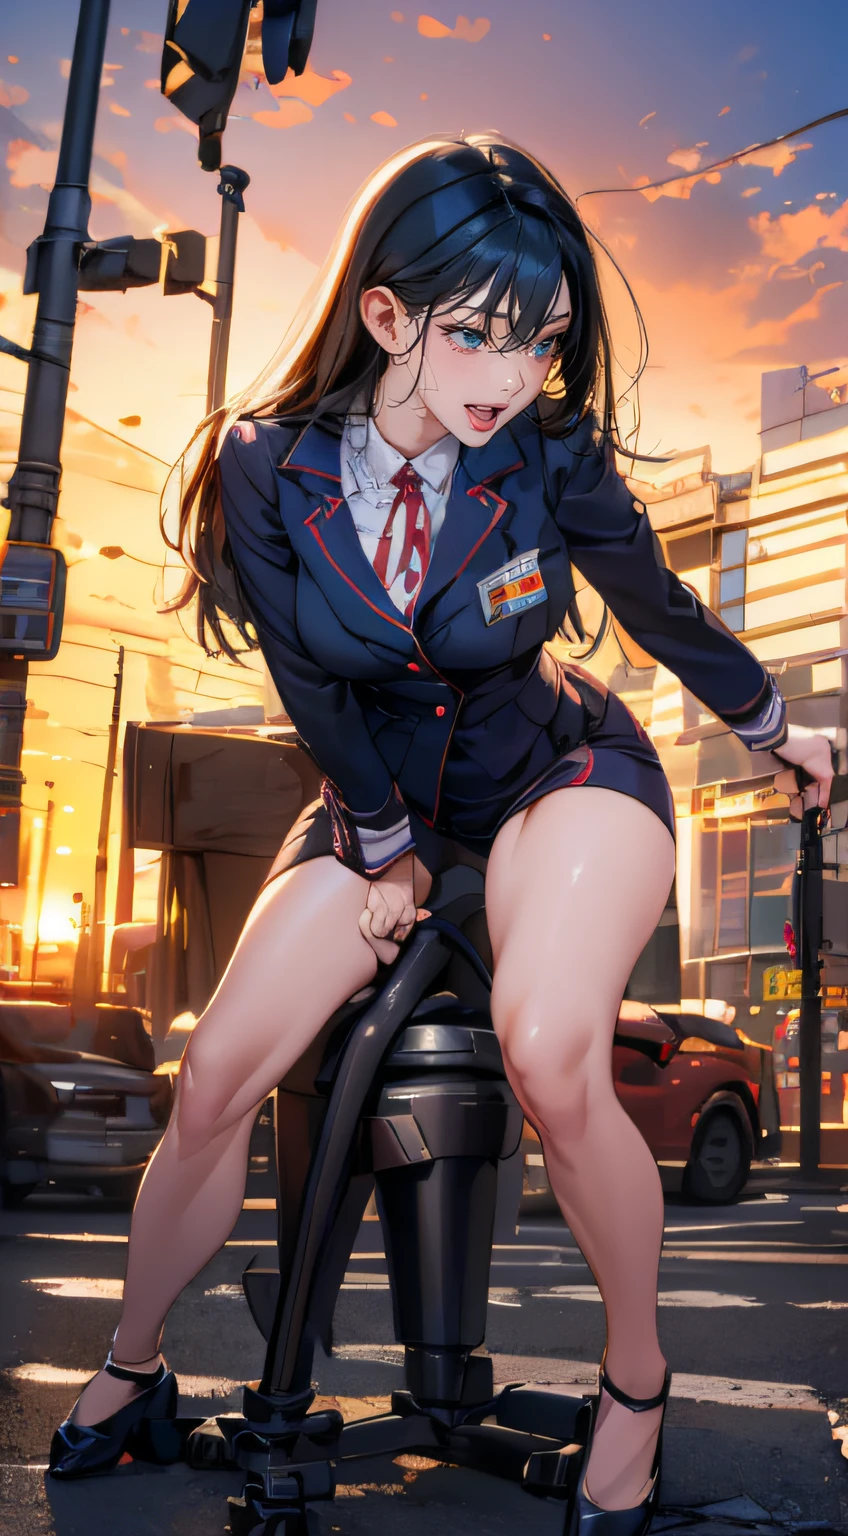 a woman, whole body, clerk uniform, round face, name plate, id card, (stocking), straddling to hit her crotch on an exposed pipe that is standing on the ground, open legs, raise leg, open mouth, , masturbation, ecstasy face, On the streets of downtown area, sunset,